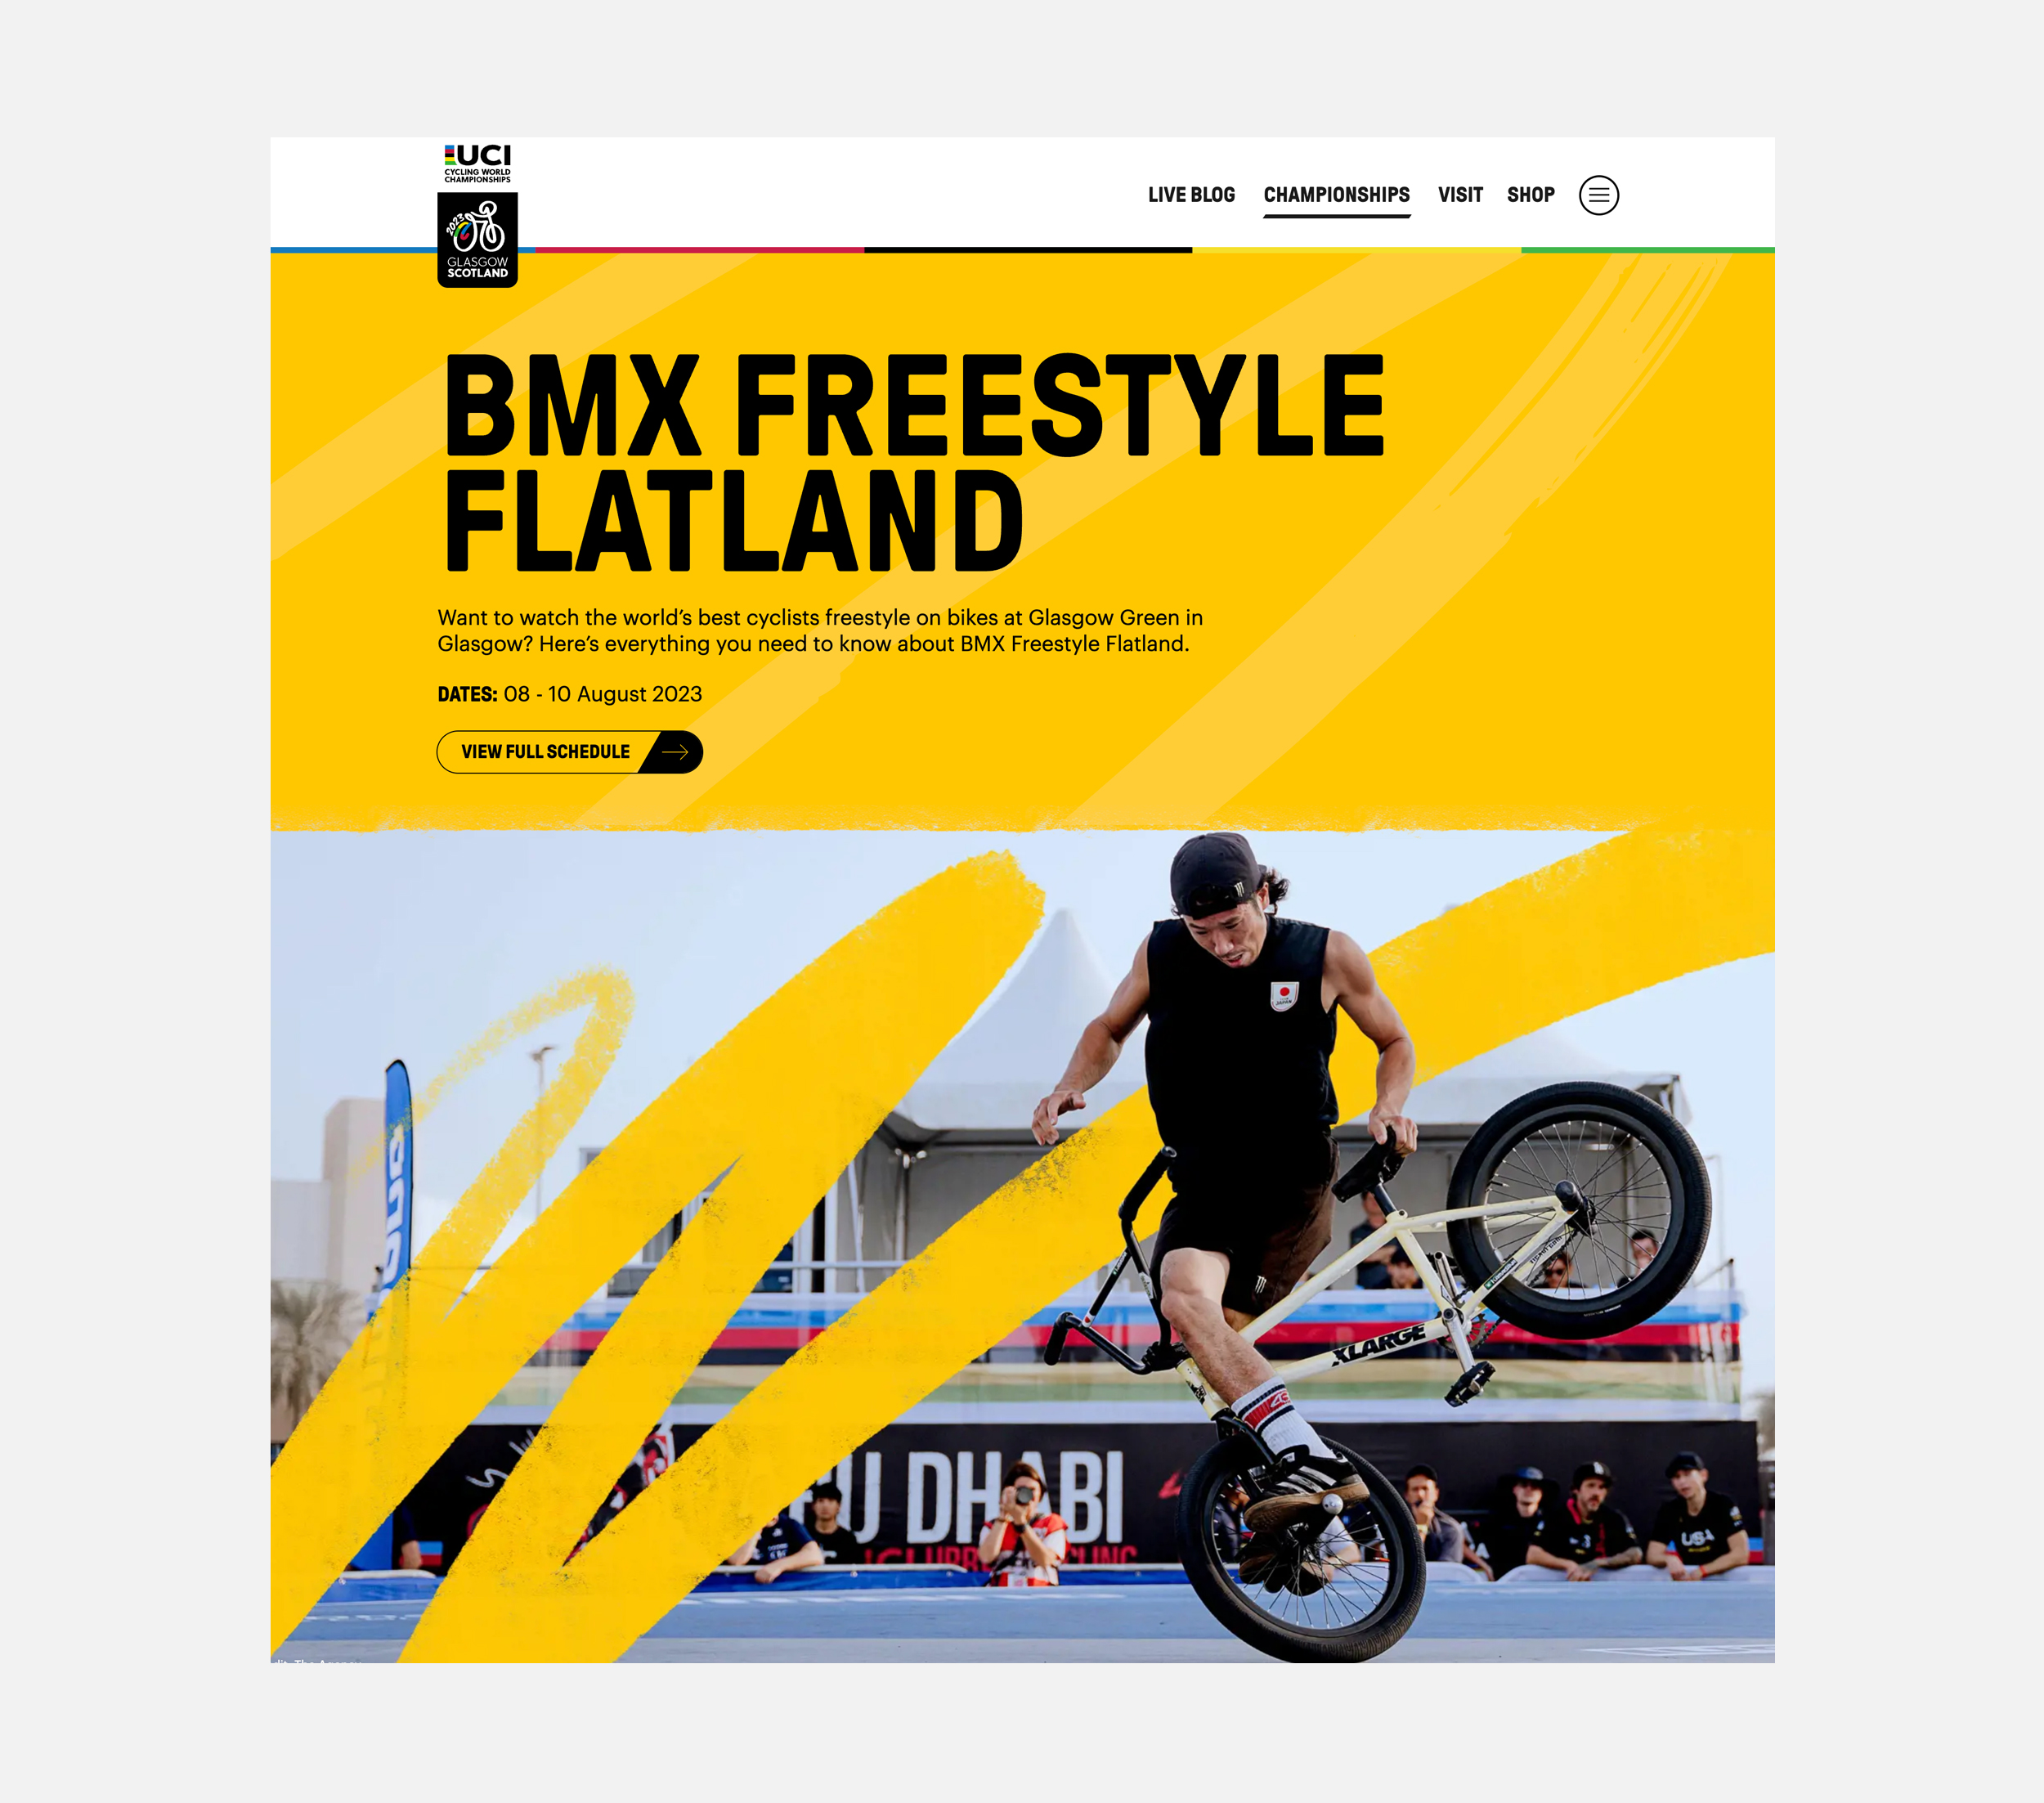 UCI Championships BMX freestyle flatland event page on the website showing a cyclist freestyling standing on the front trucks of his BMX